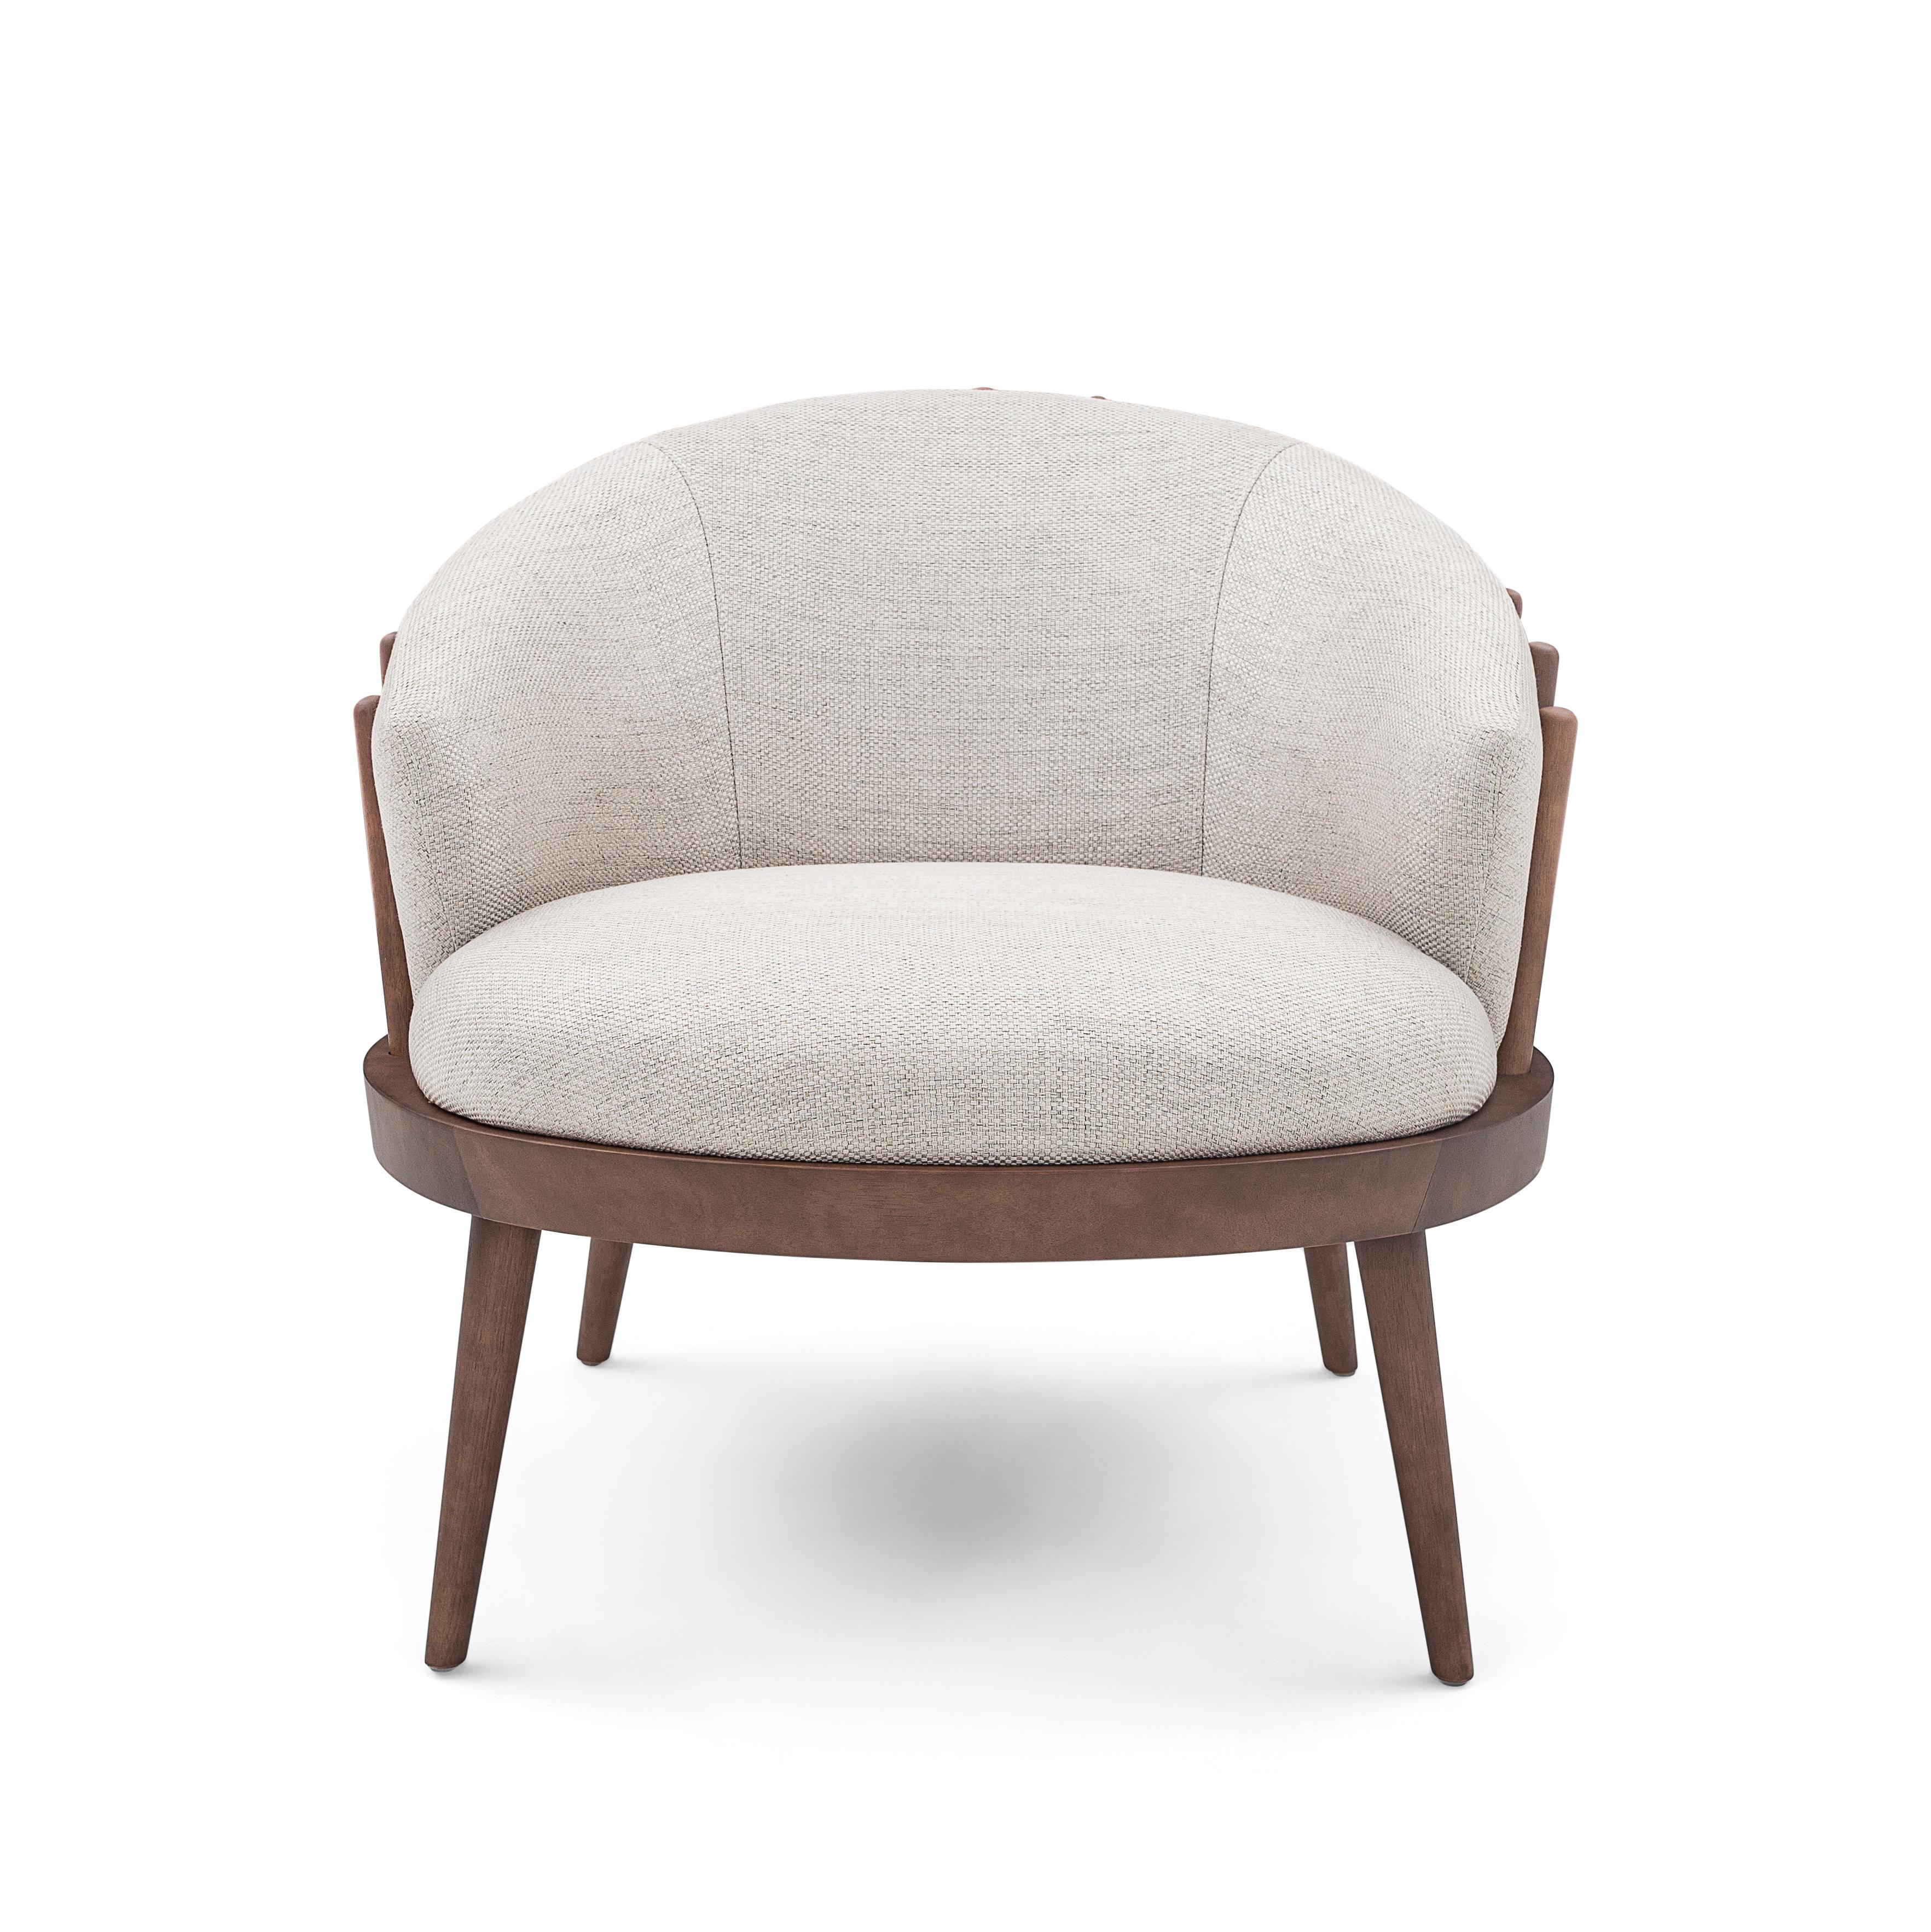 Fane Upholstered Armchair in Walnut Wood Finish and Off-White Fabric In New Condition For Sale In Miami, FL